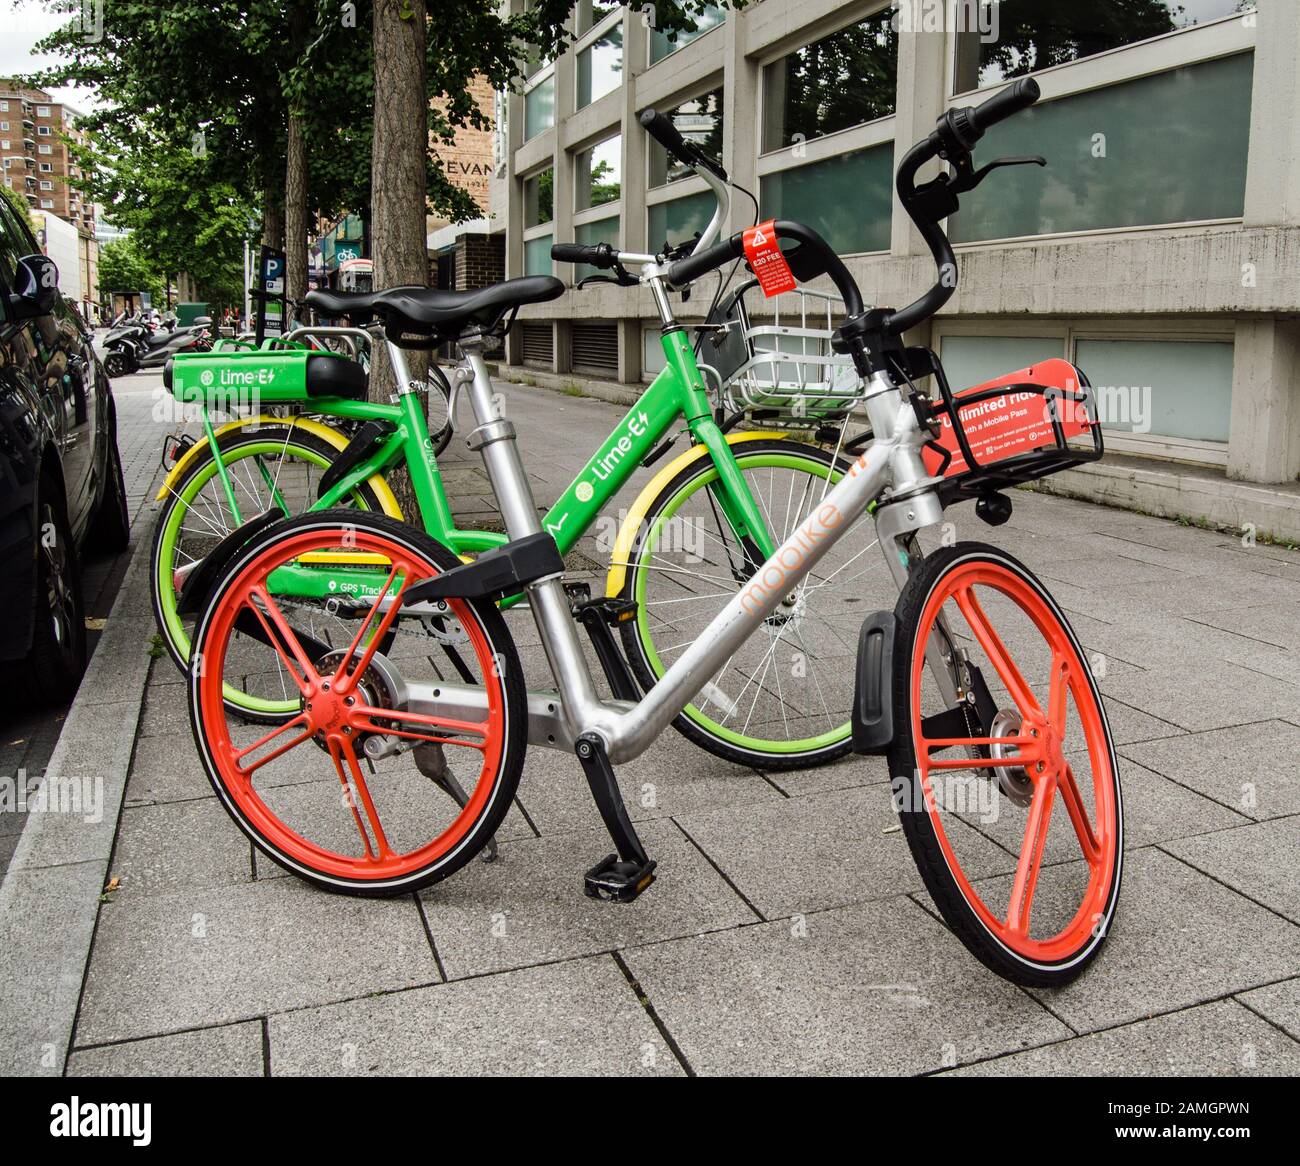 London, UK - July 20, 2019: hire bicycles from the companies Lime and Mobike parked on a pavement in Lambeth, London.  There are concerns that some bi Stock Photo